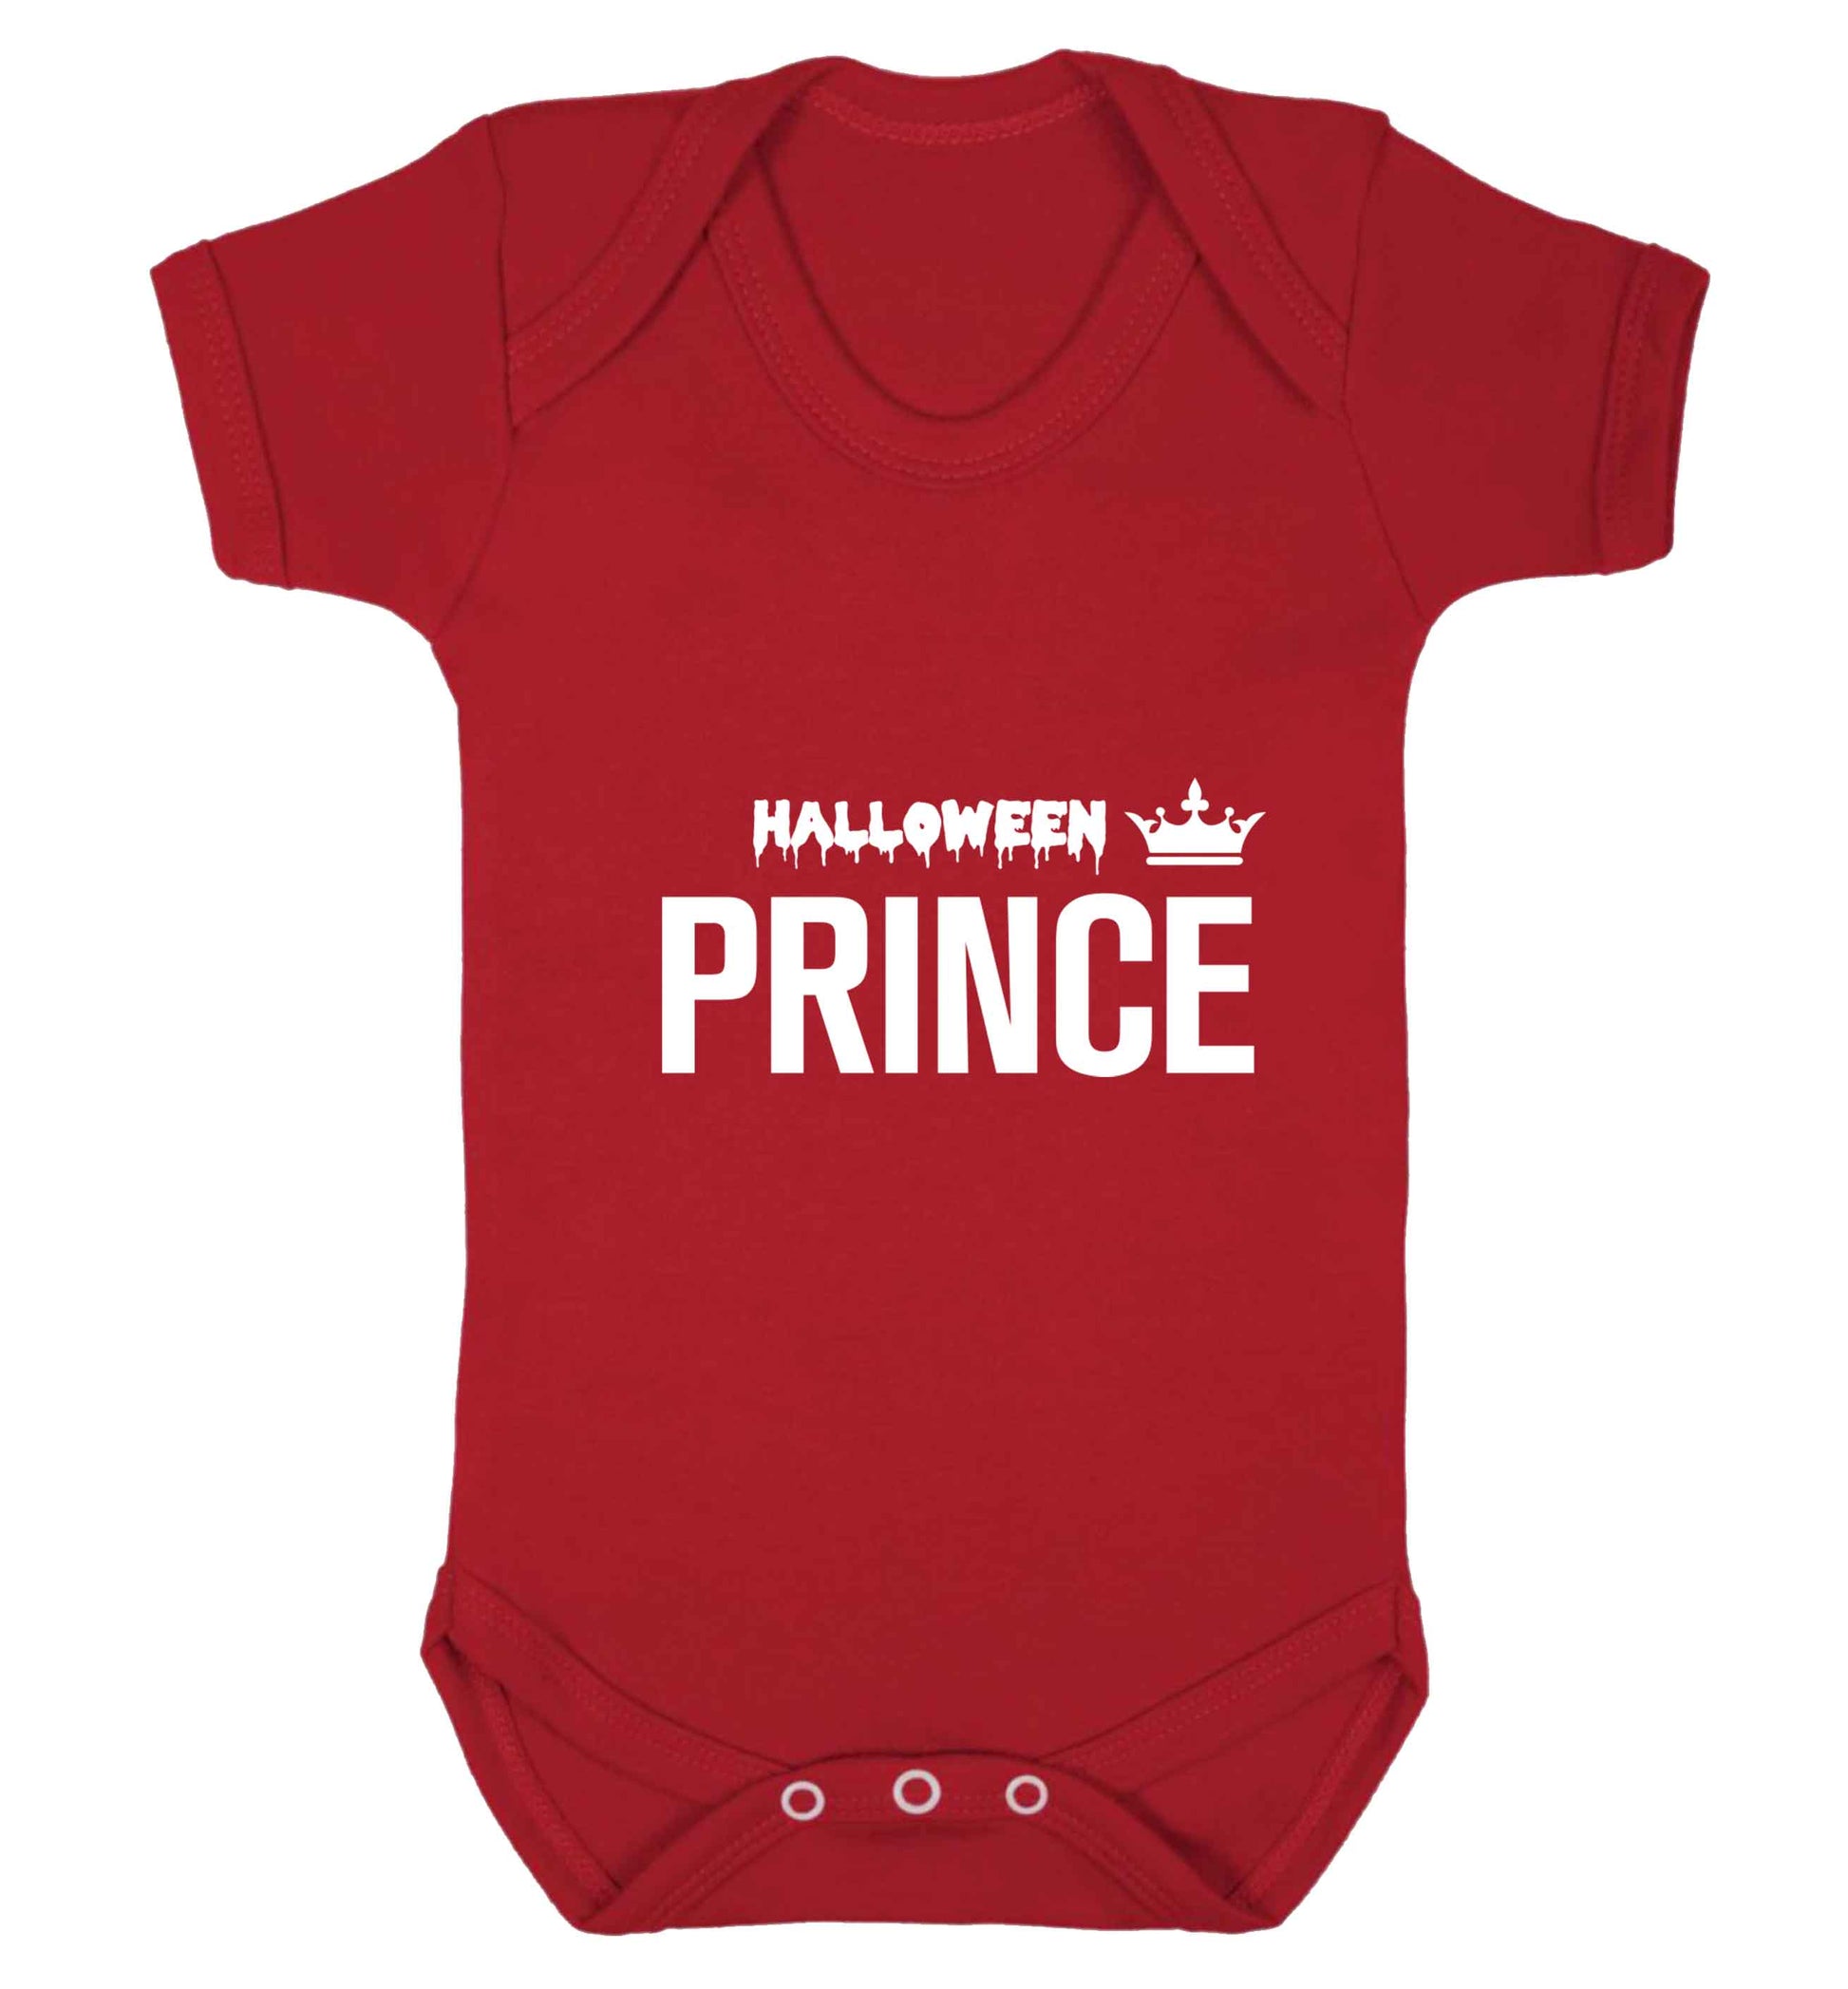 Halloween prince baby vest red 18-24 months